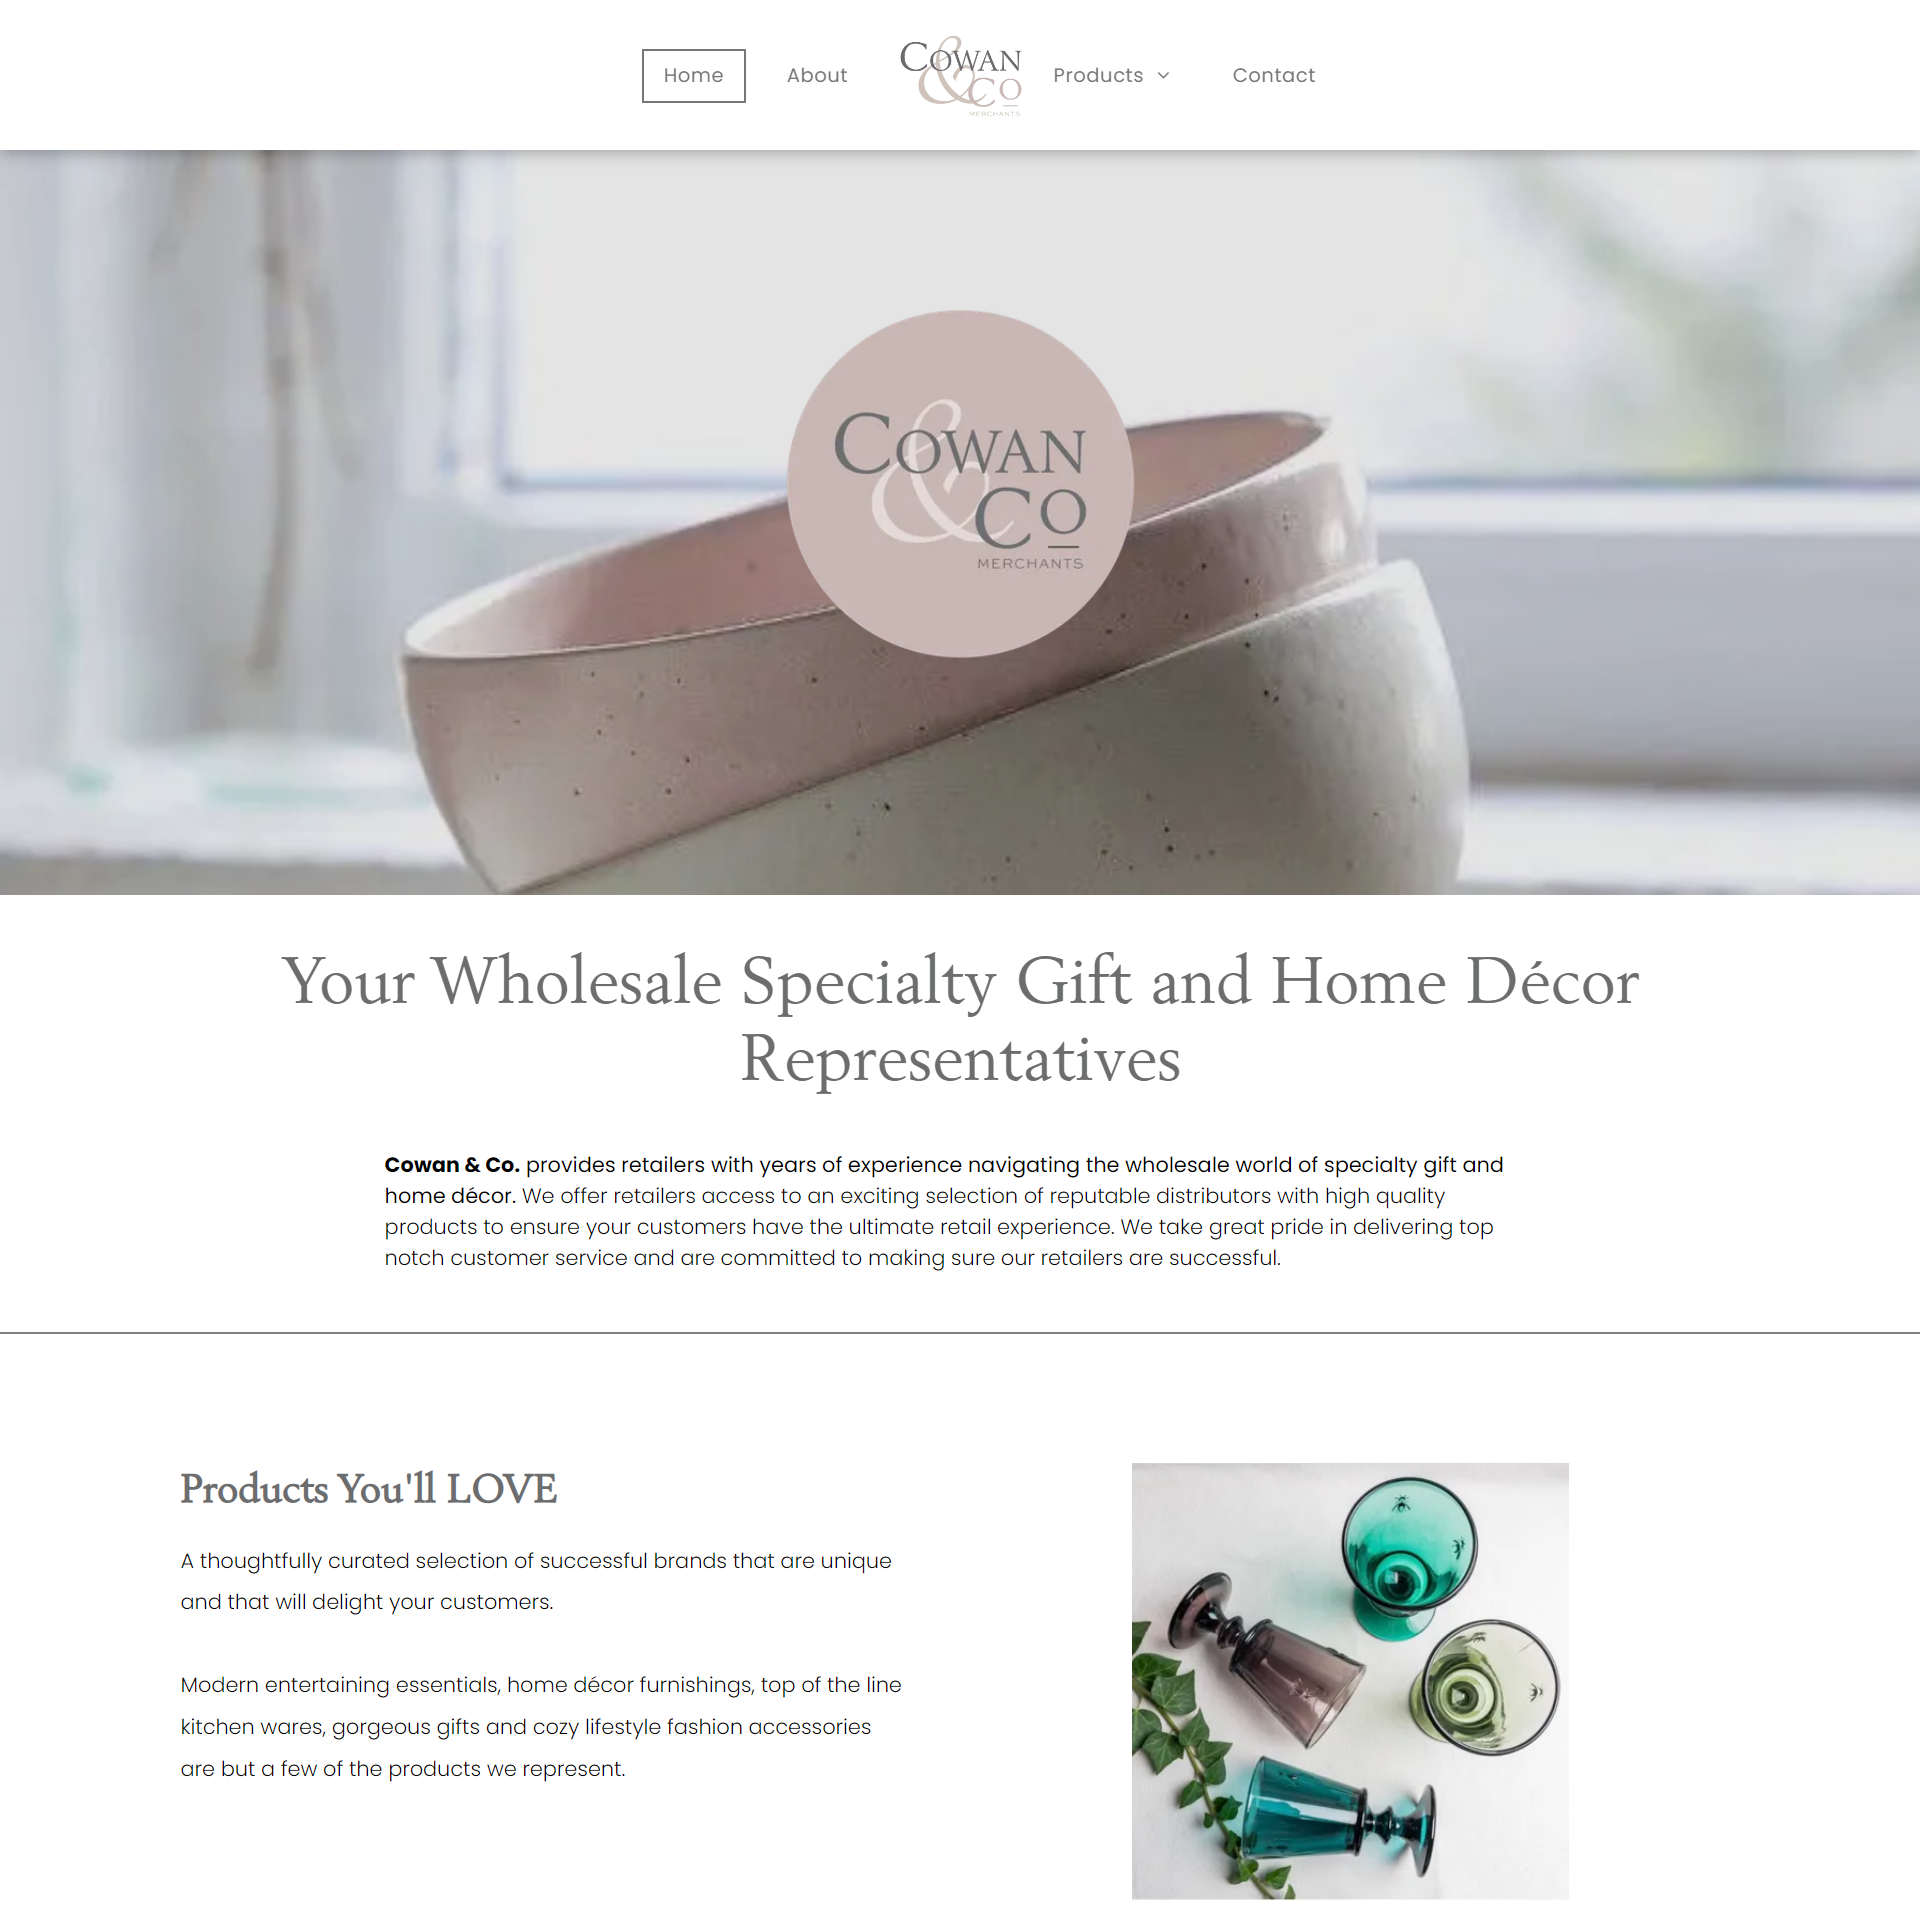 A screenshot of a website for a wholesale specialty gift and home decor company.